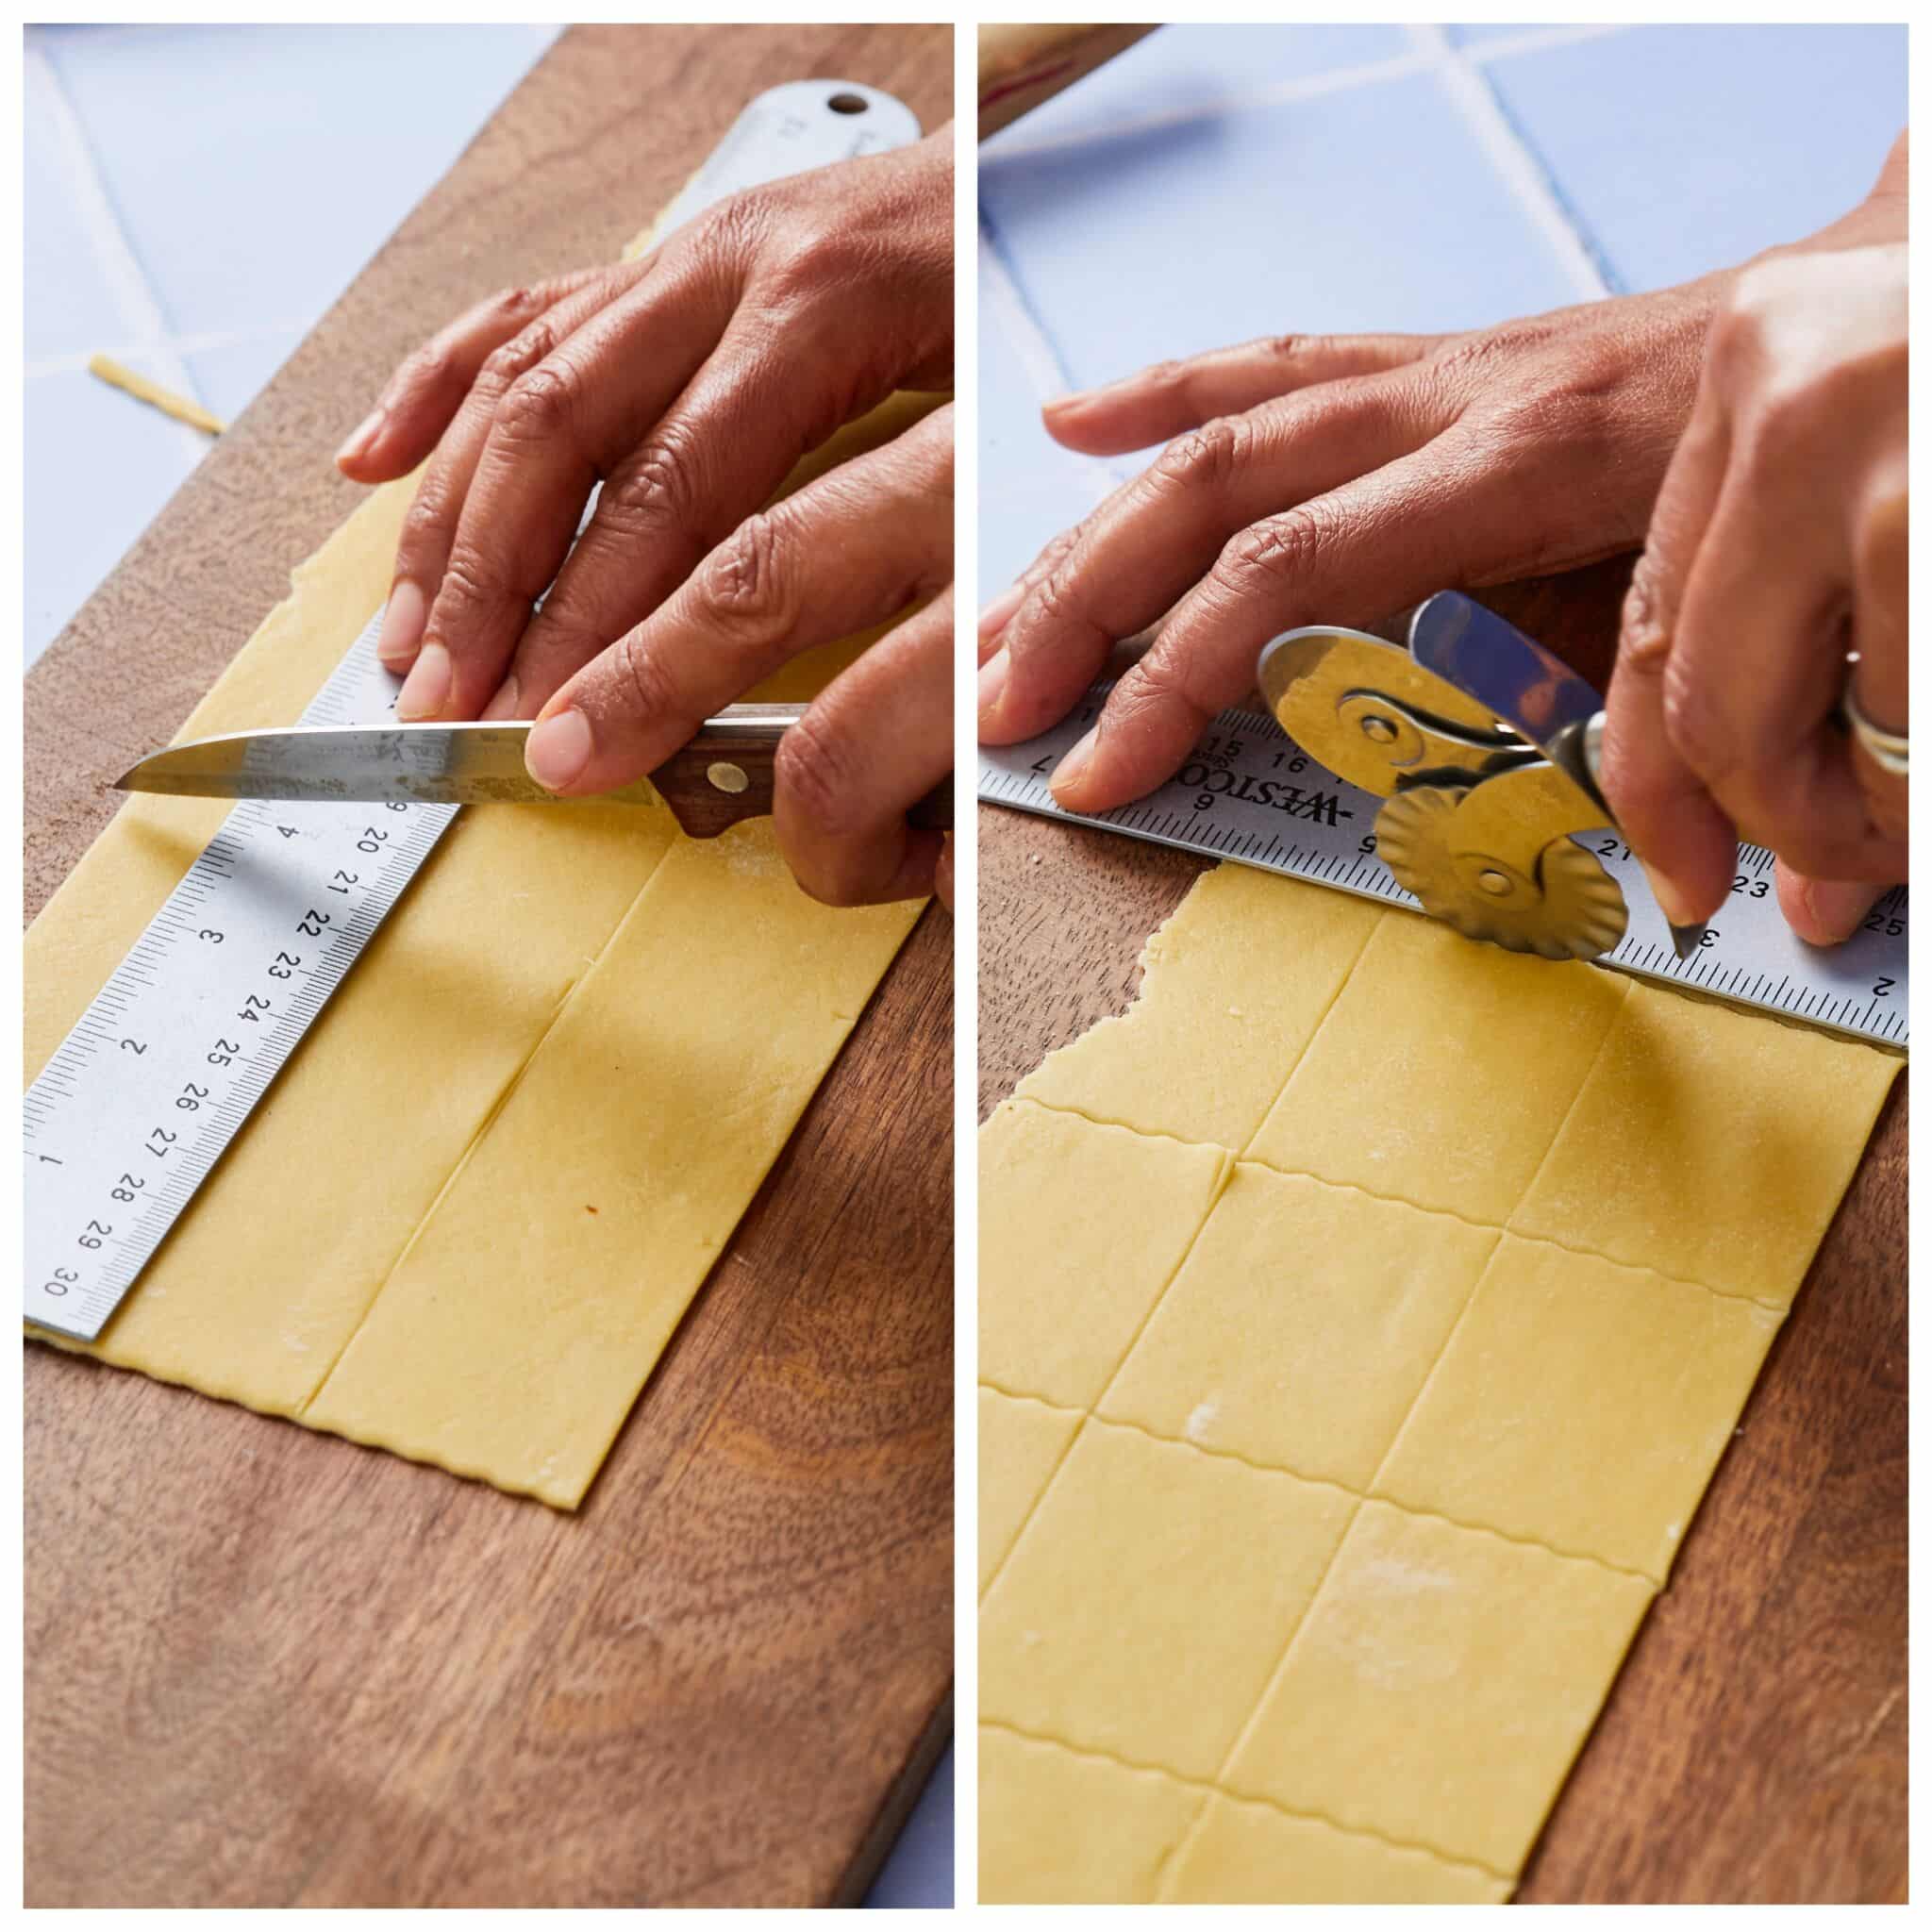 Step-by -step instruction on sharing Farfalle Pasta: divide the dough into quarters and work with one section at a time. Roll the dough as thin as possible. With a pizza cutter, cut the dough lengthwise into 1 1/2 inch (4 cm) strips. Use a fluted pastry wheel to cut the strip into 2-inch (5 cm) rectangles. 